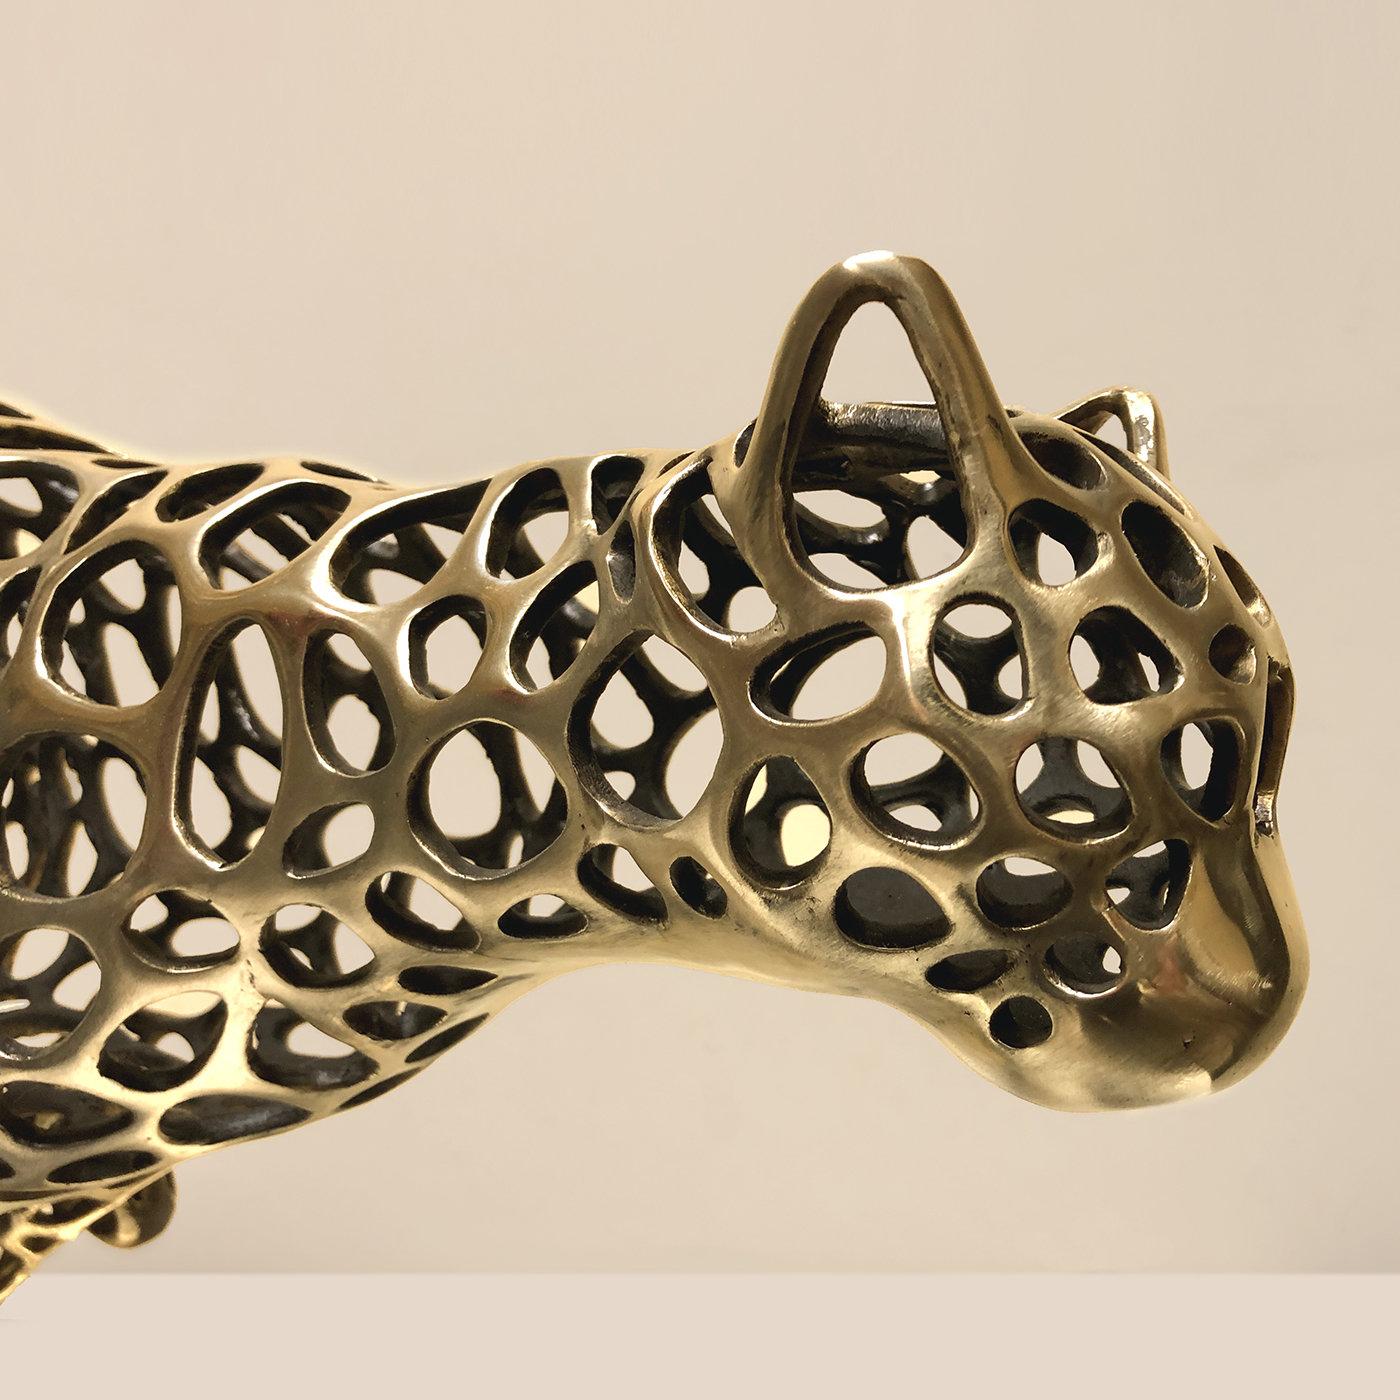 Exuding a fierce character and velocity, this stunning sculpture depicts a running cheetah. Exquisitely crafted of bronze using the lost-wax casting technique, the piece is marked by a series of perforations that add lightness to the sense of